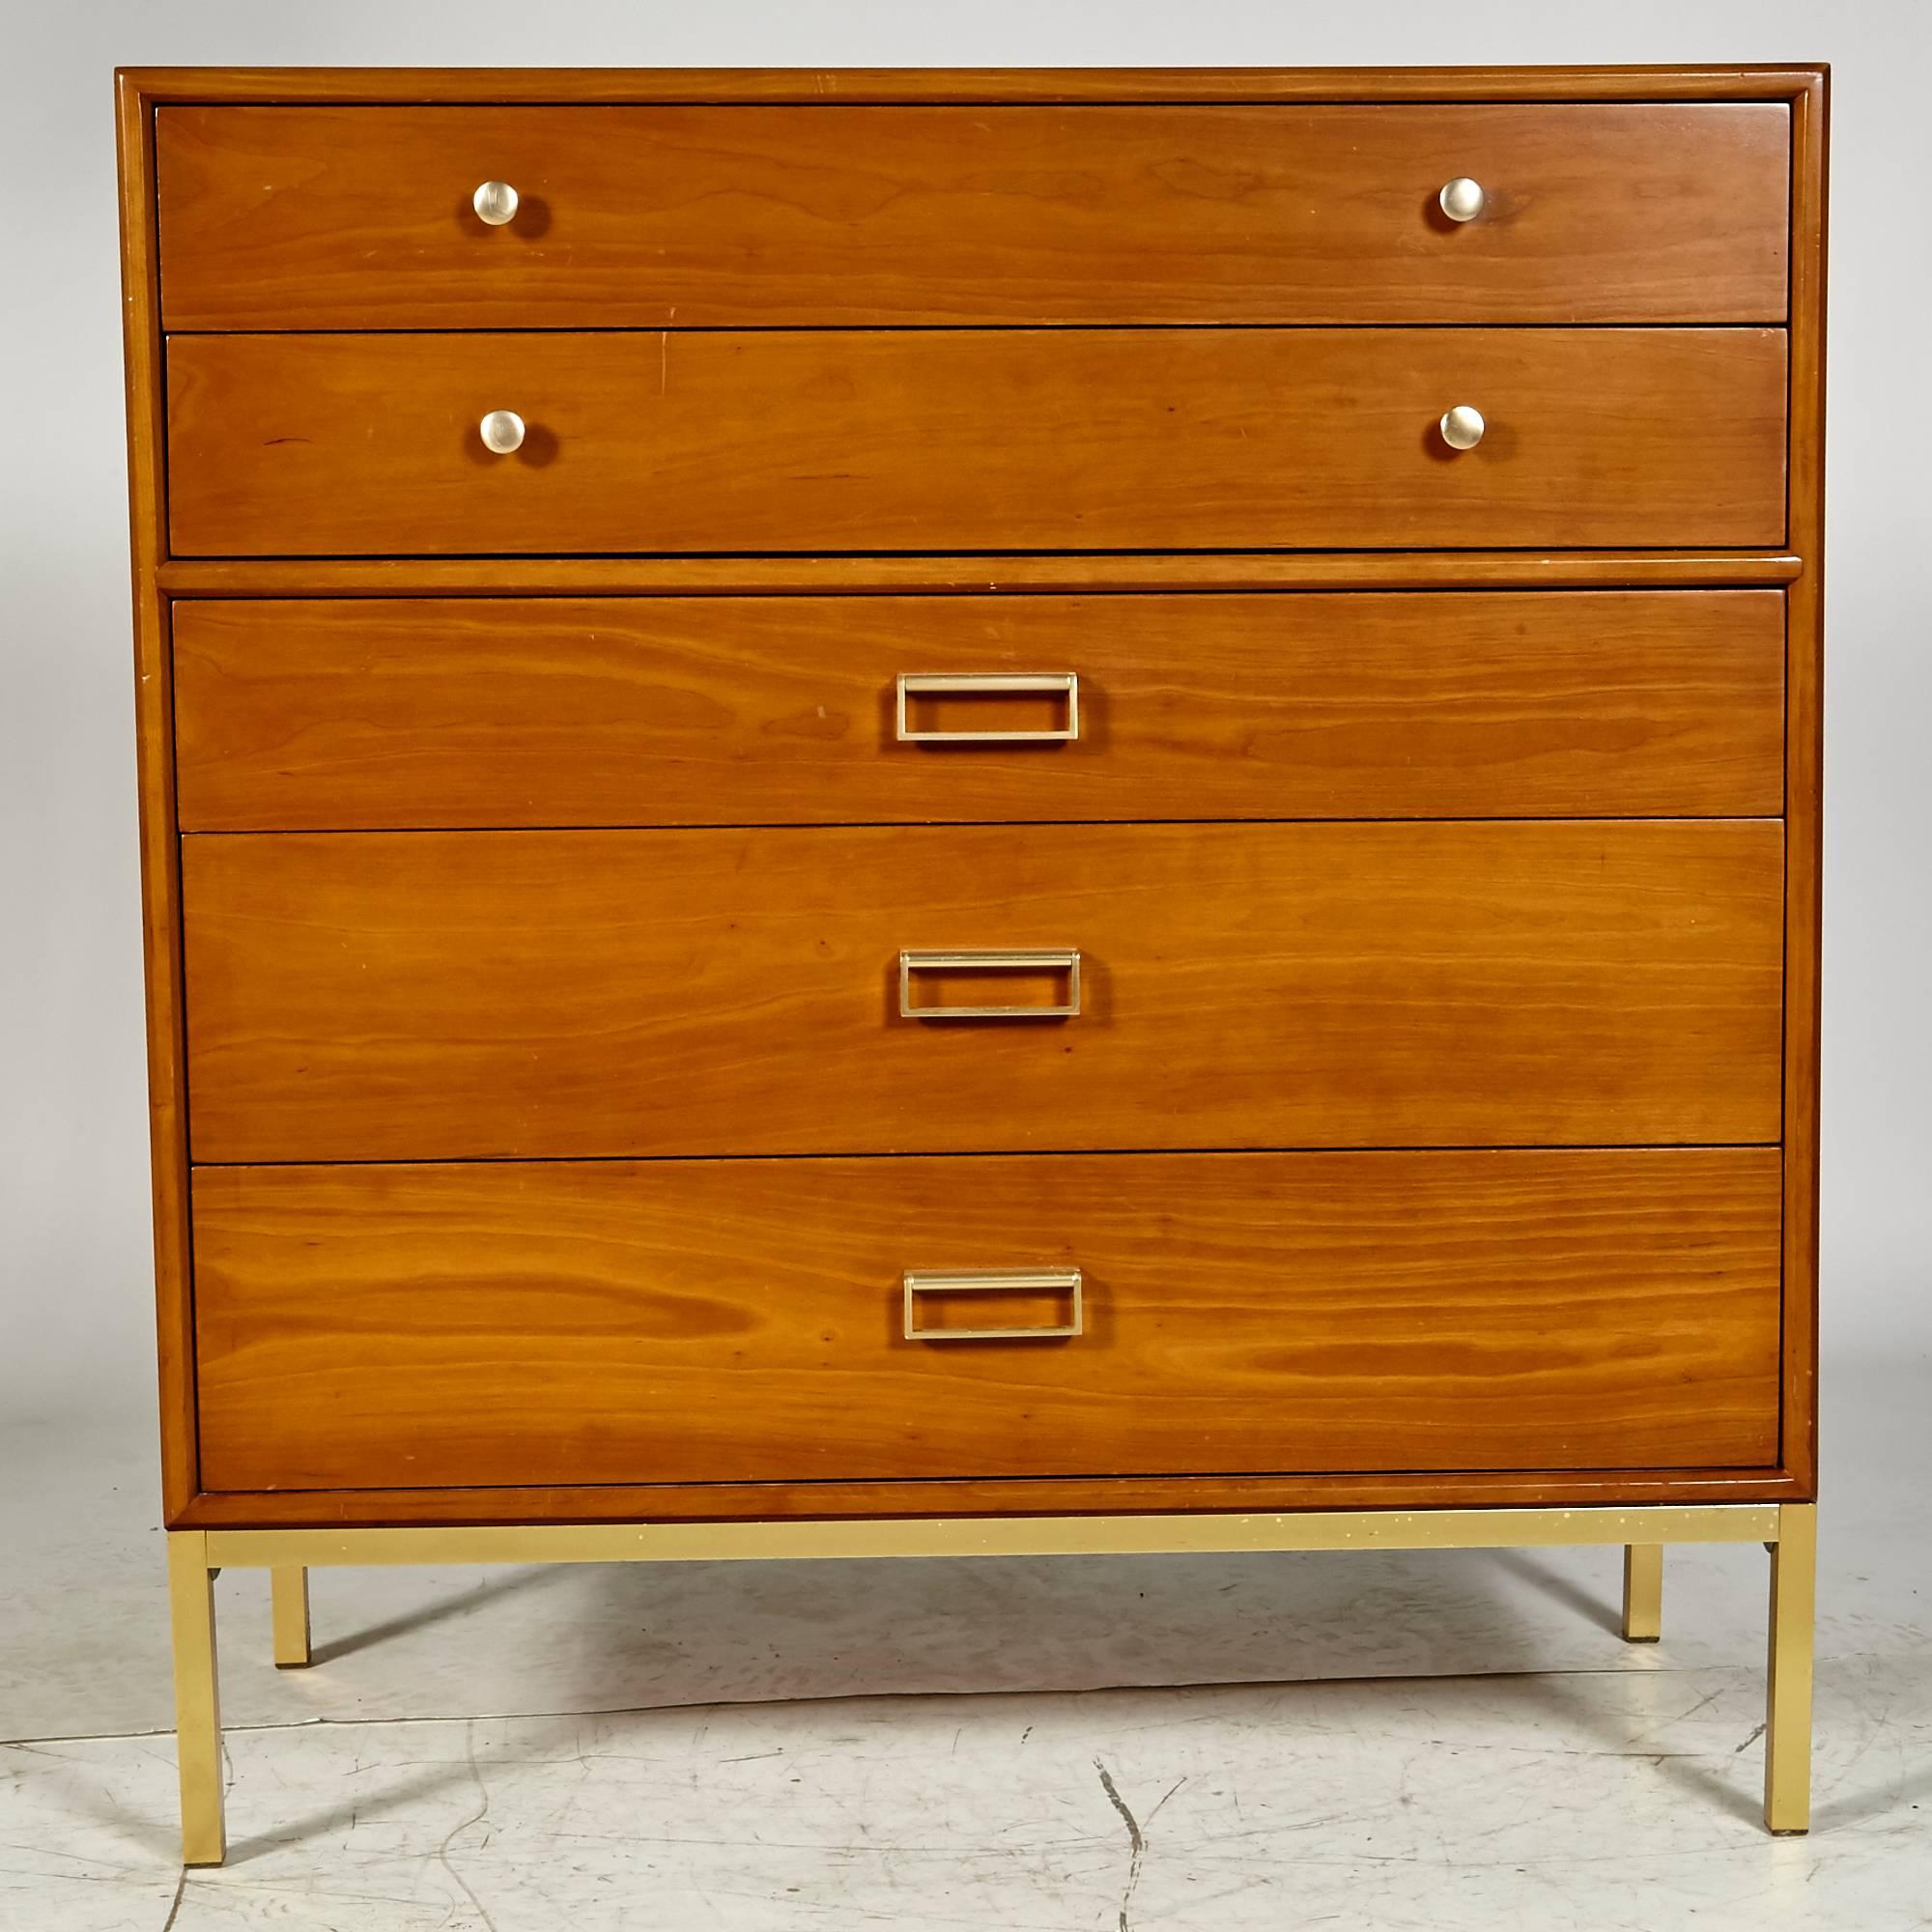 Mid-Century Modern five-drawer tall dresser in the 